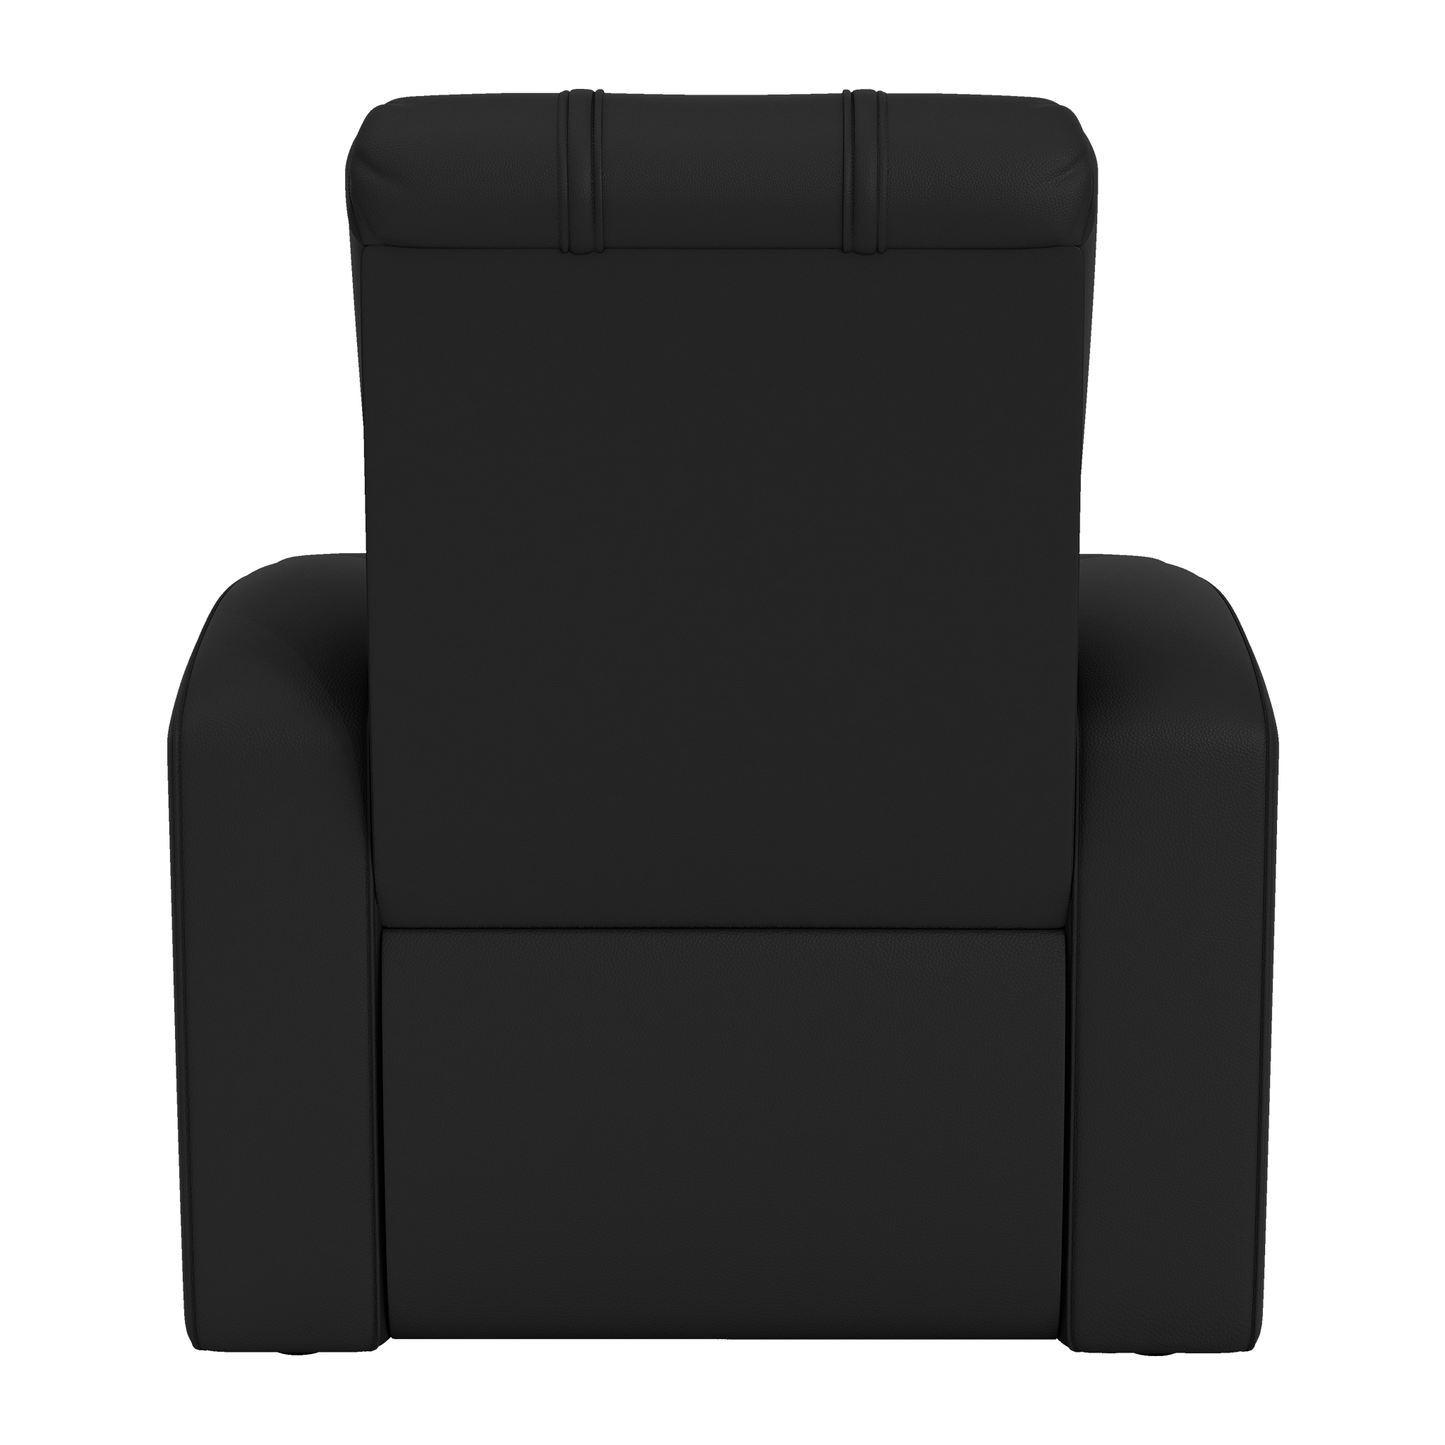 Relax Home Theater Recliner with Knights of Degen Primary Logo